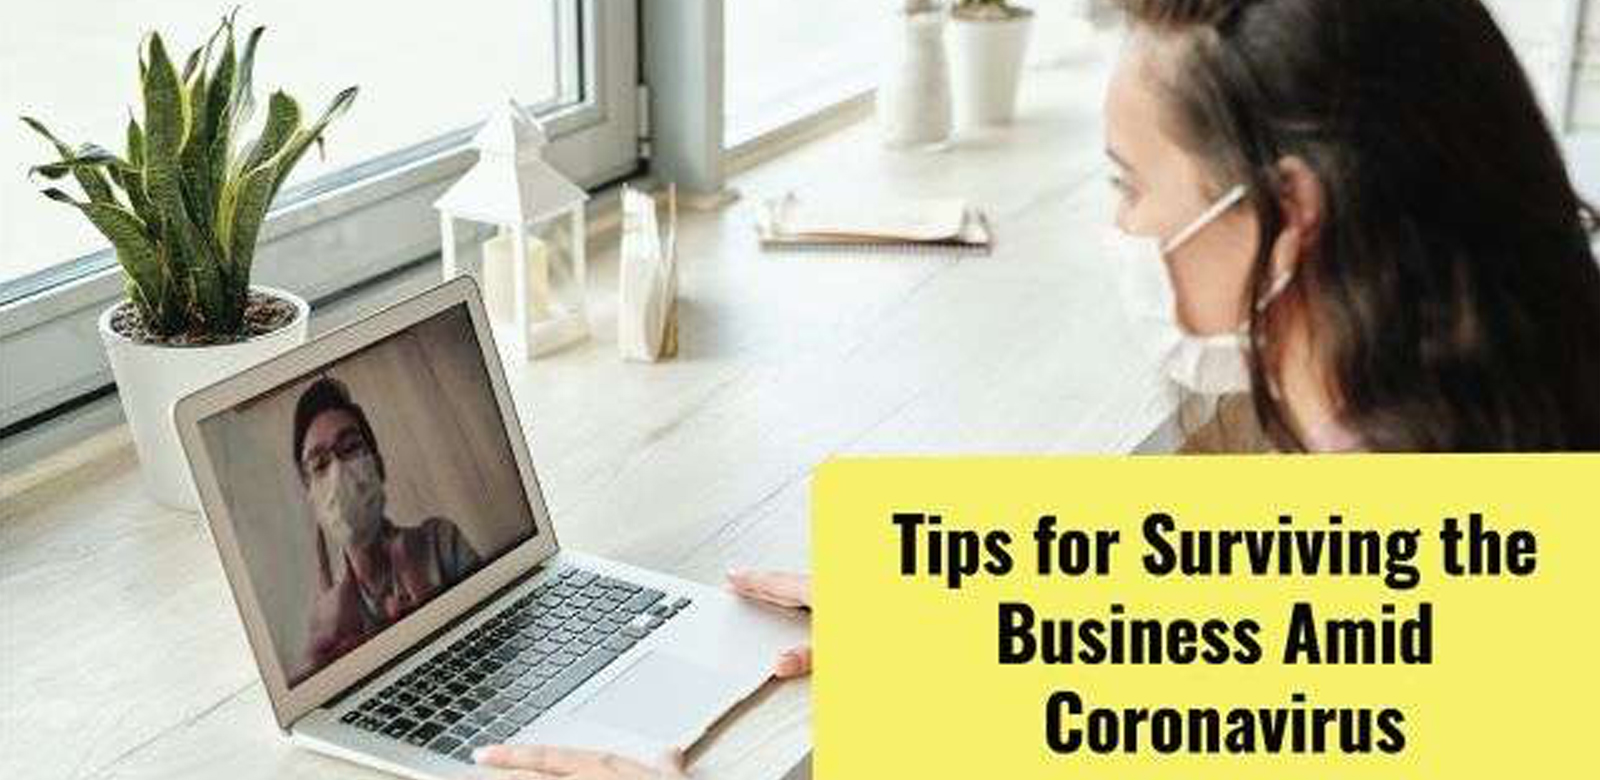 Tips For Surviving The Business Amid Coronavirus